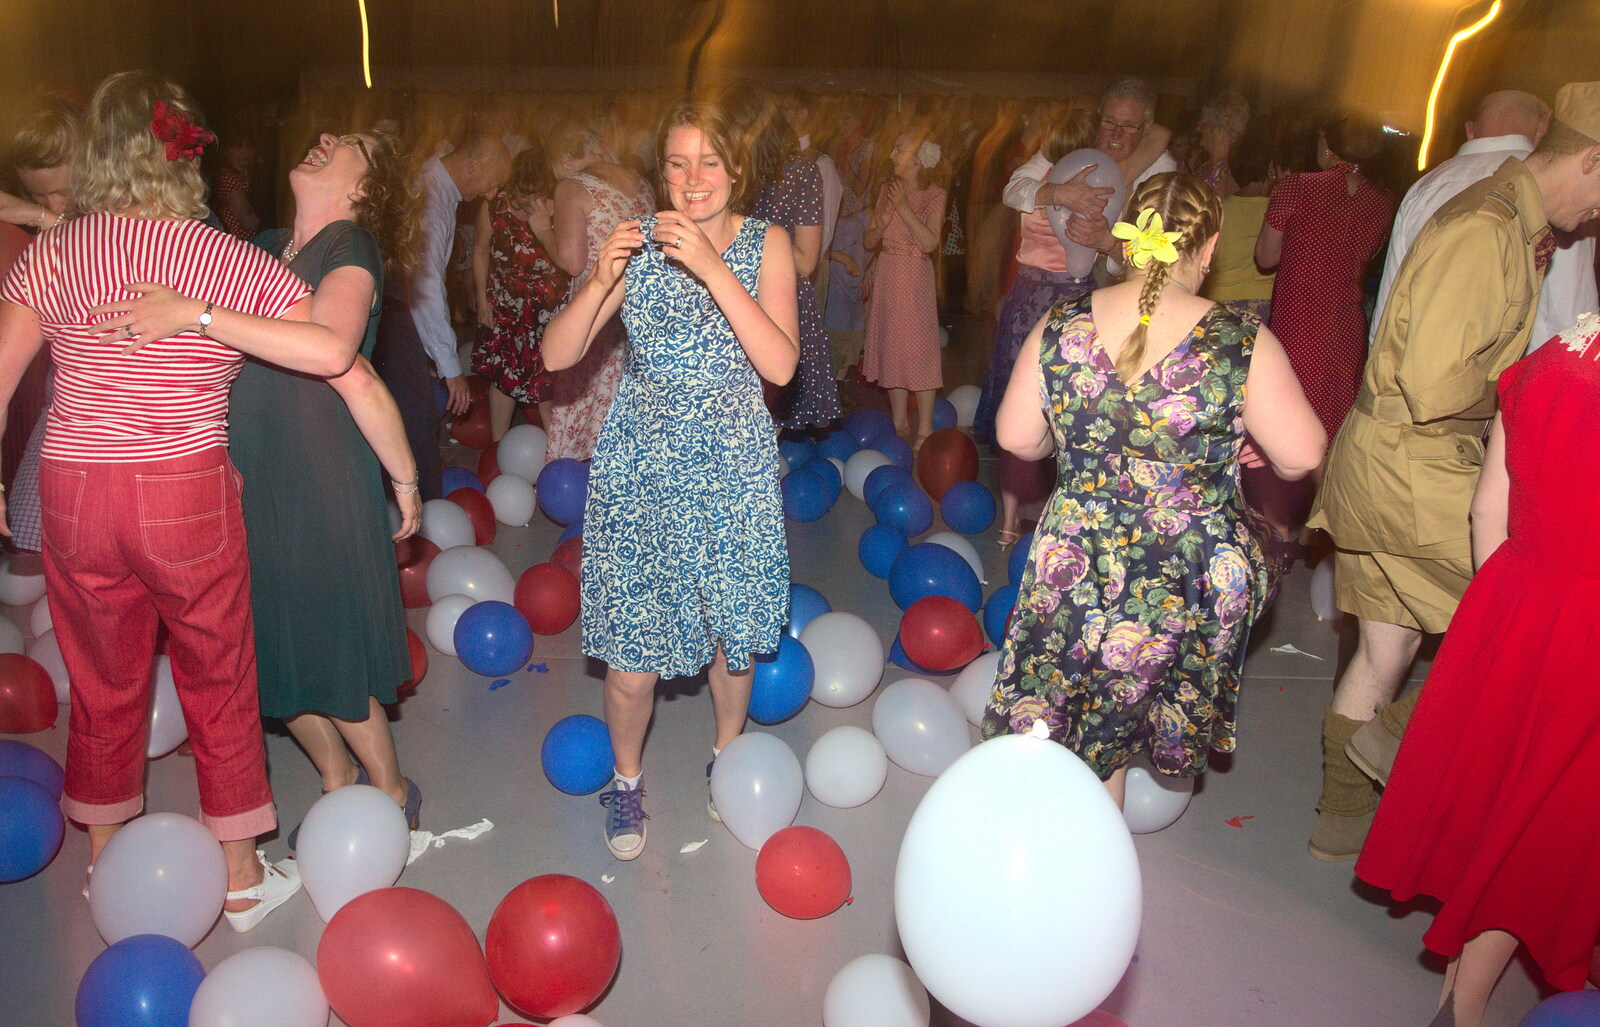 Isobel dances among the balloons from "Our Little Friends" Warbirds Hangar Dance, Hardwick, Norfolk - 9th July 2016